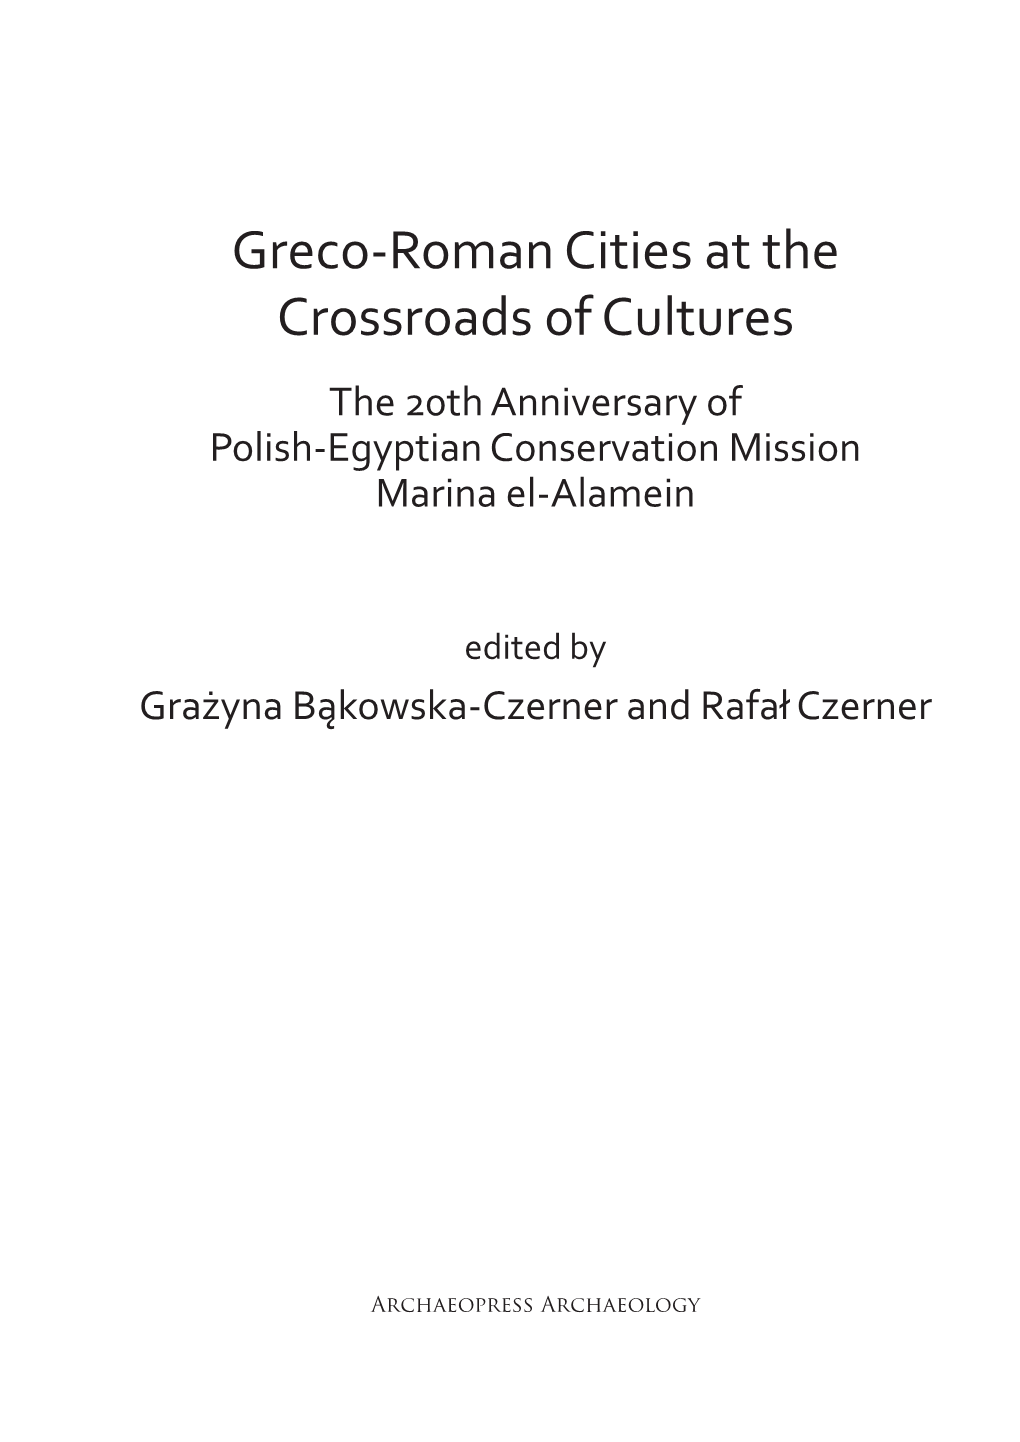 Greco-Roman Cities at the Crossroads of Cultures the 20Th Anniversary of Polish-Egyptian Conservation Mission Marina El-Alamein